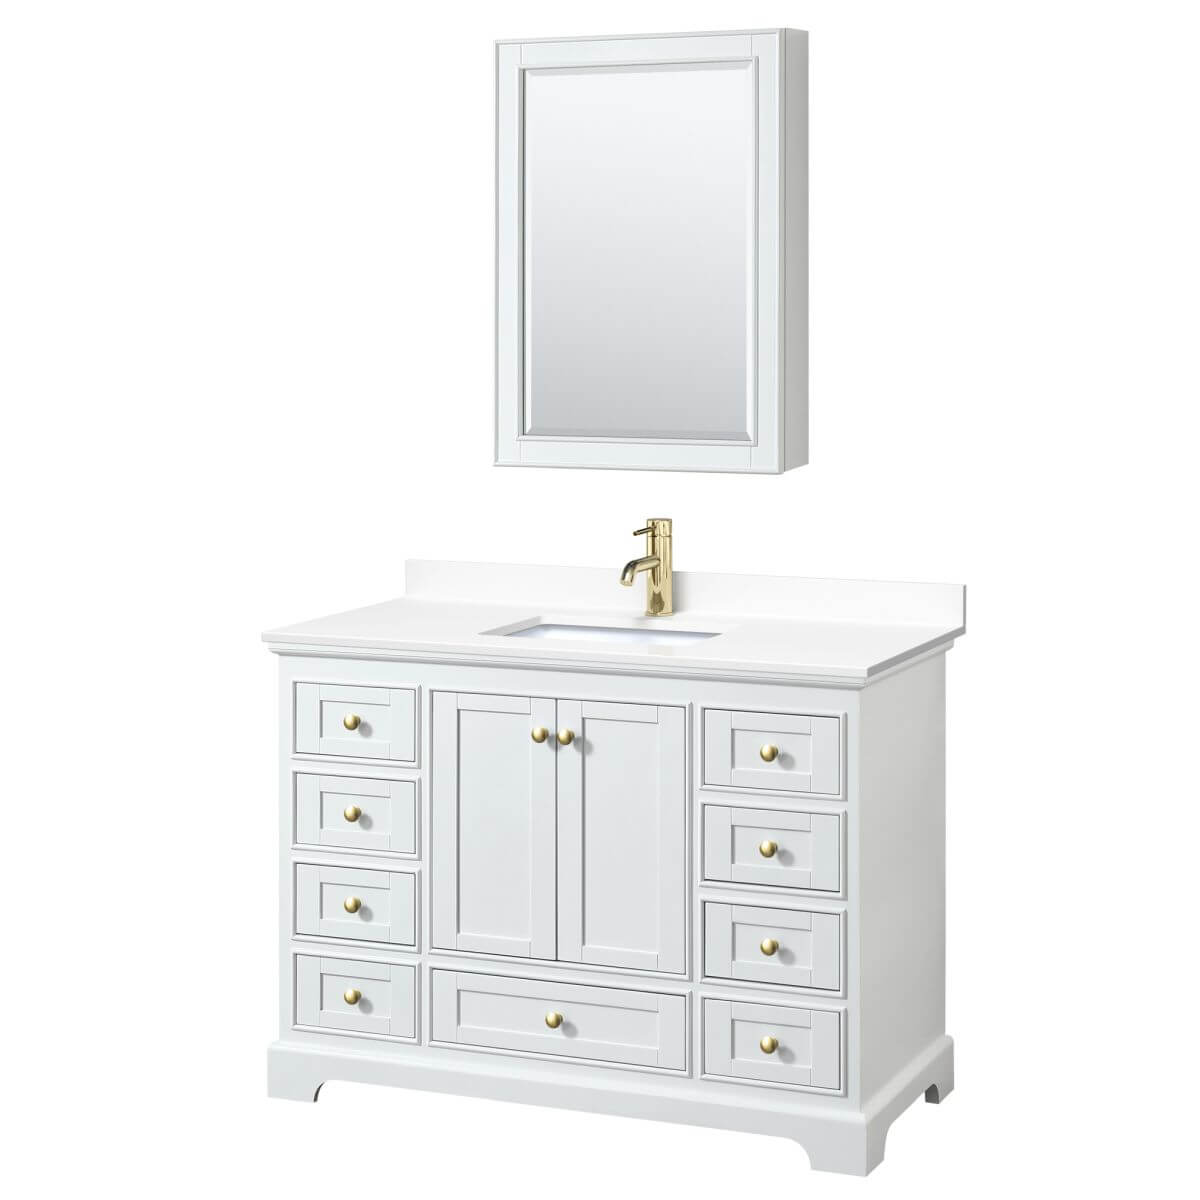 Wyndham Collection Deborah 48 inch Single Bathroom Vanity in White with White Cultured Marble Countertop, Undermount Square Sink, Brushed Gold Trim and Medicine Cabinet - WCS202048SWGWCUNSMED